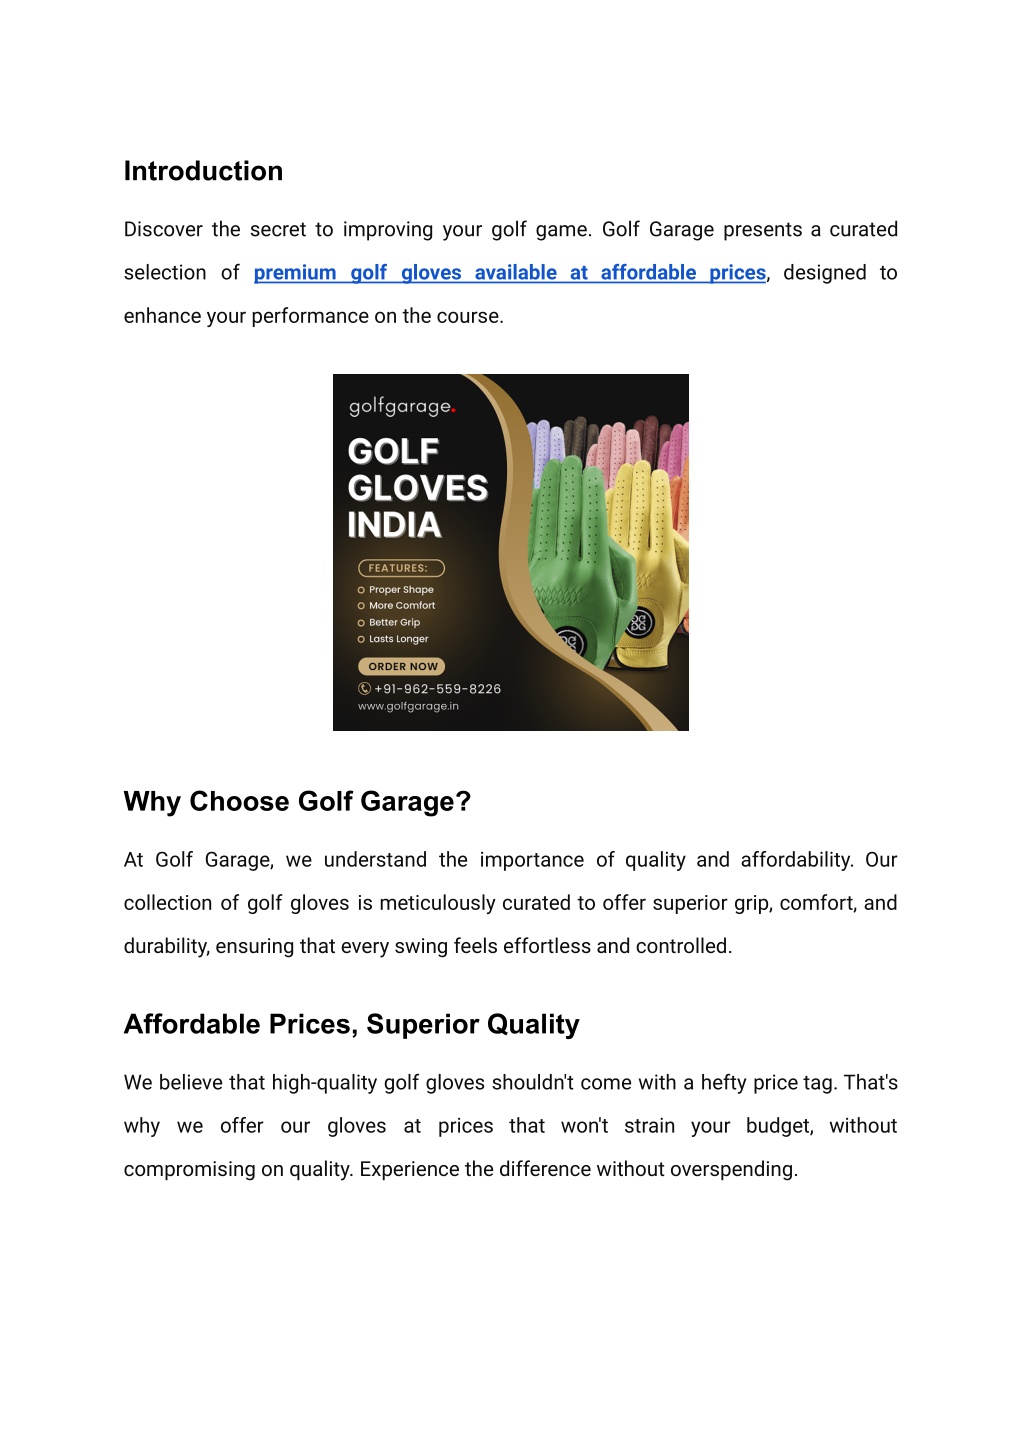 PPT - Premium Golf Gloves Available at Affordable Prices PowerPoint ...